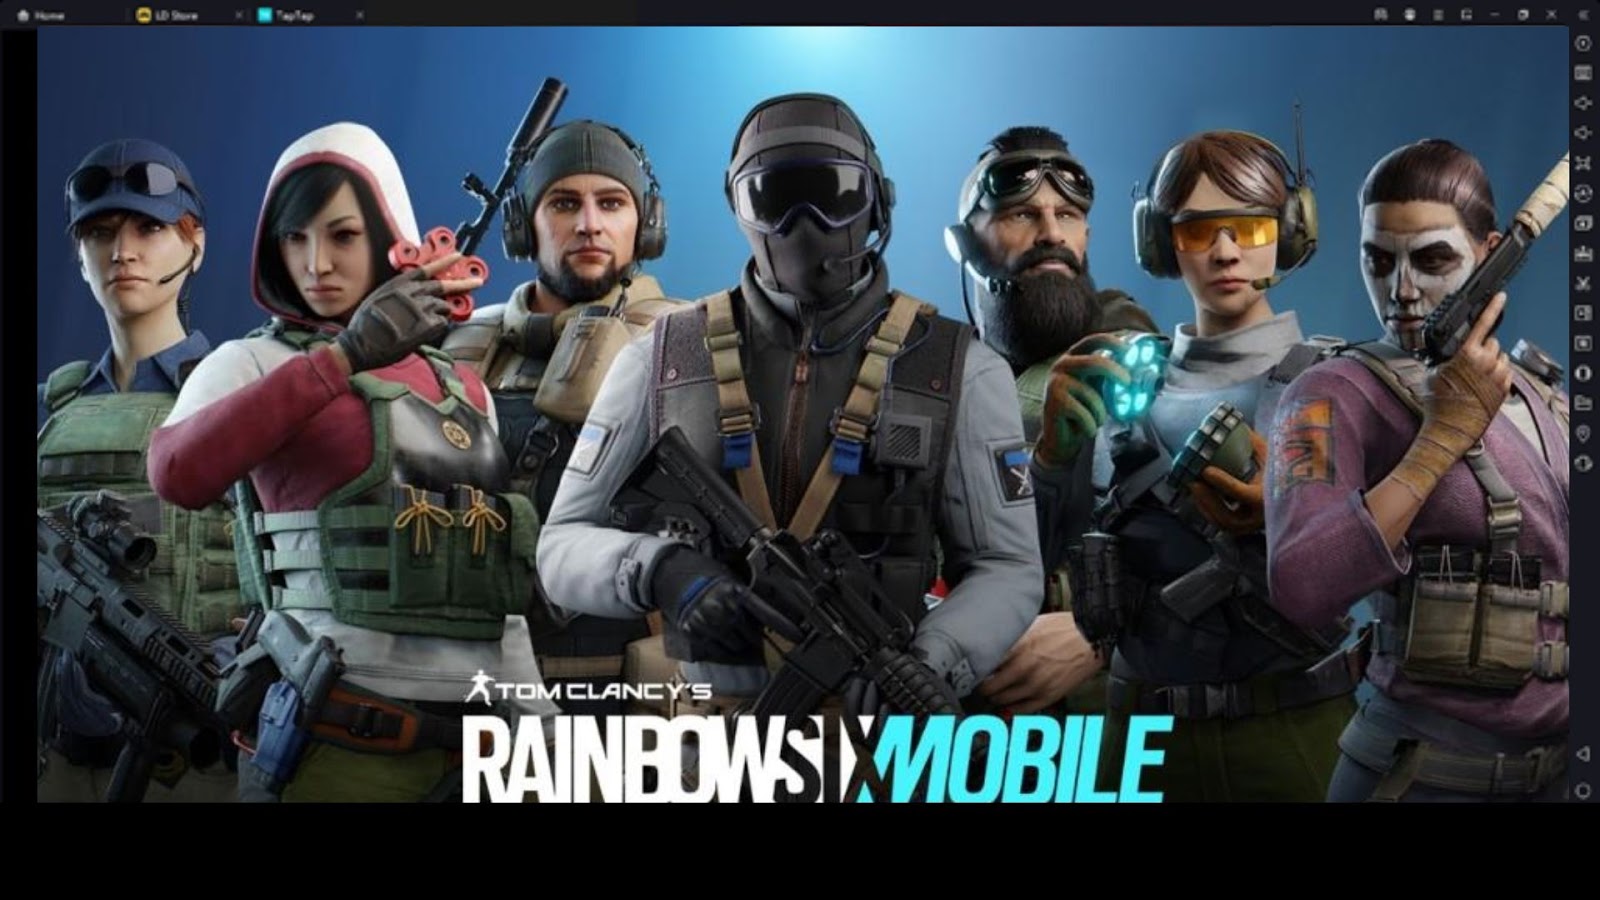 Rainbow Six Mobile: Best Tips and Tricks for Beginners